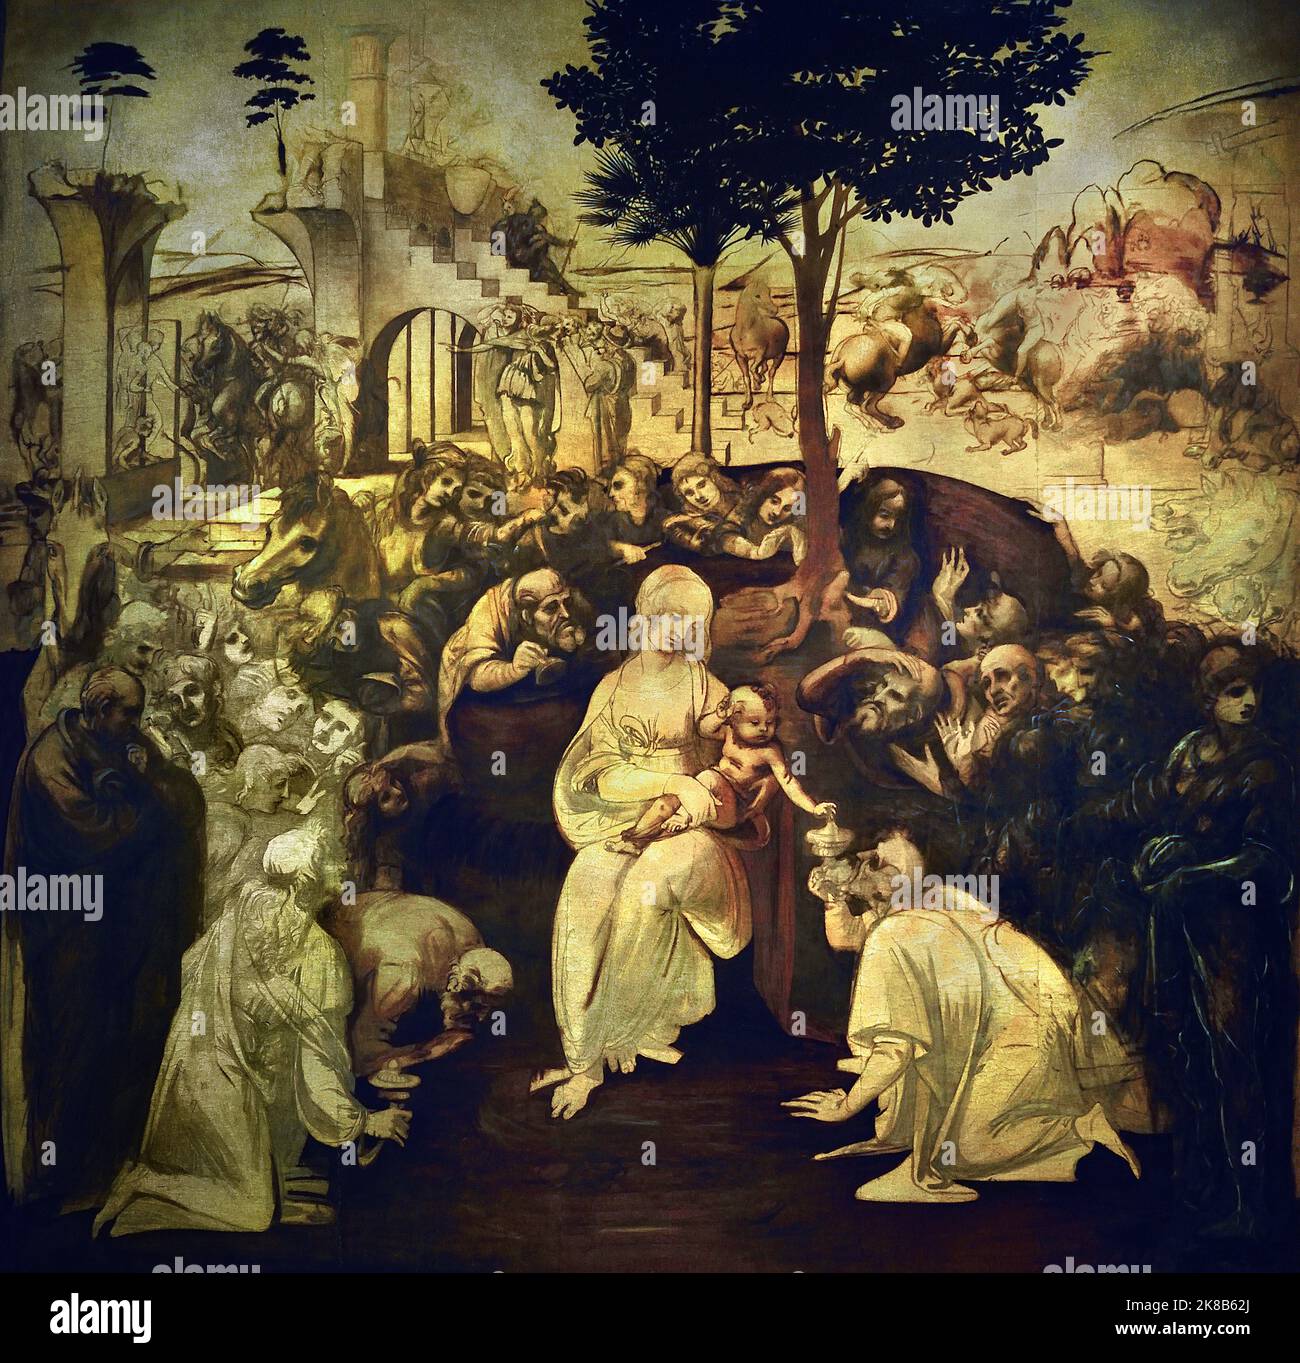 Adoration of the Magi, (San Donato in Scopeto), Leonardo da Vinci, (Vinci 1452 – Amboise 1519) , Florence, Italy. (  In September 1481, Leonardo was still working on the painting, but later he left Florence for the court of Ludovico Sforza in Milan, interrupting the painting he was producing for the church of San Donato in Scopeto. ) Stock Photo